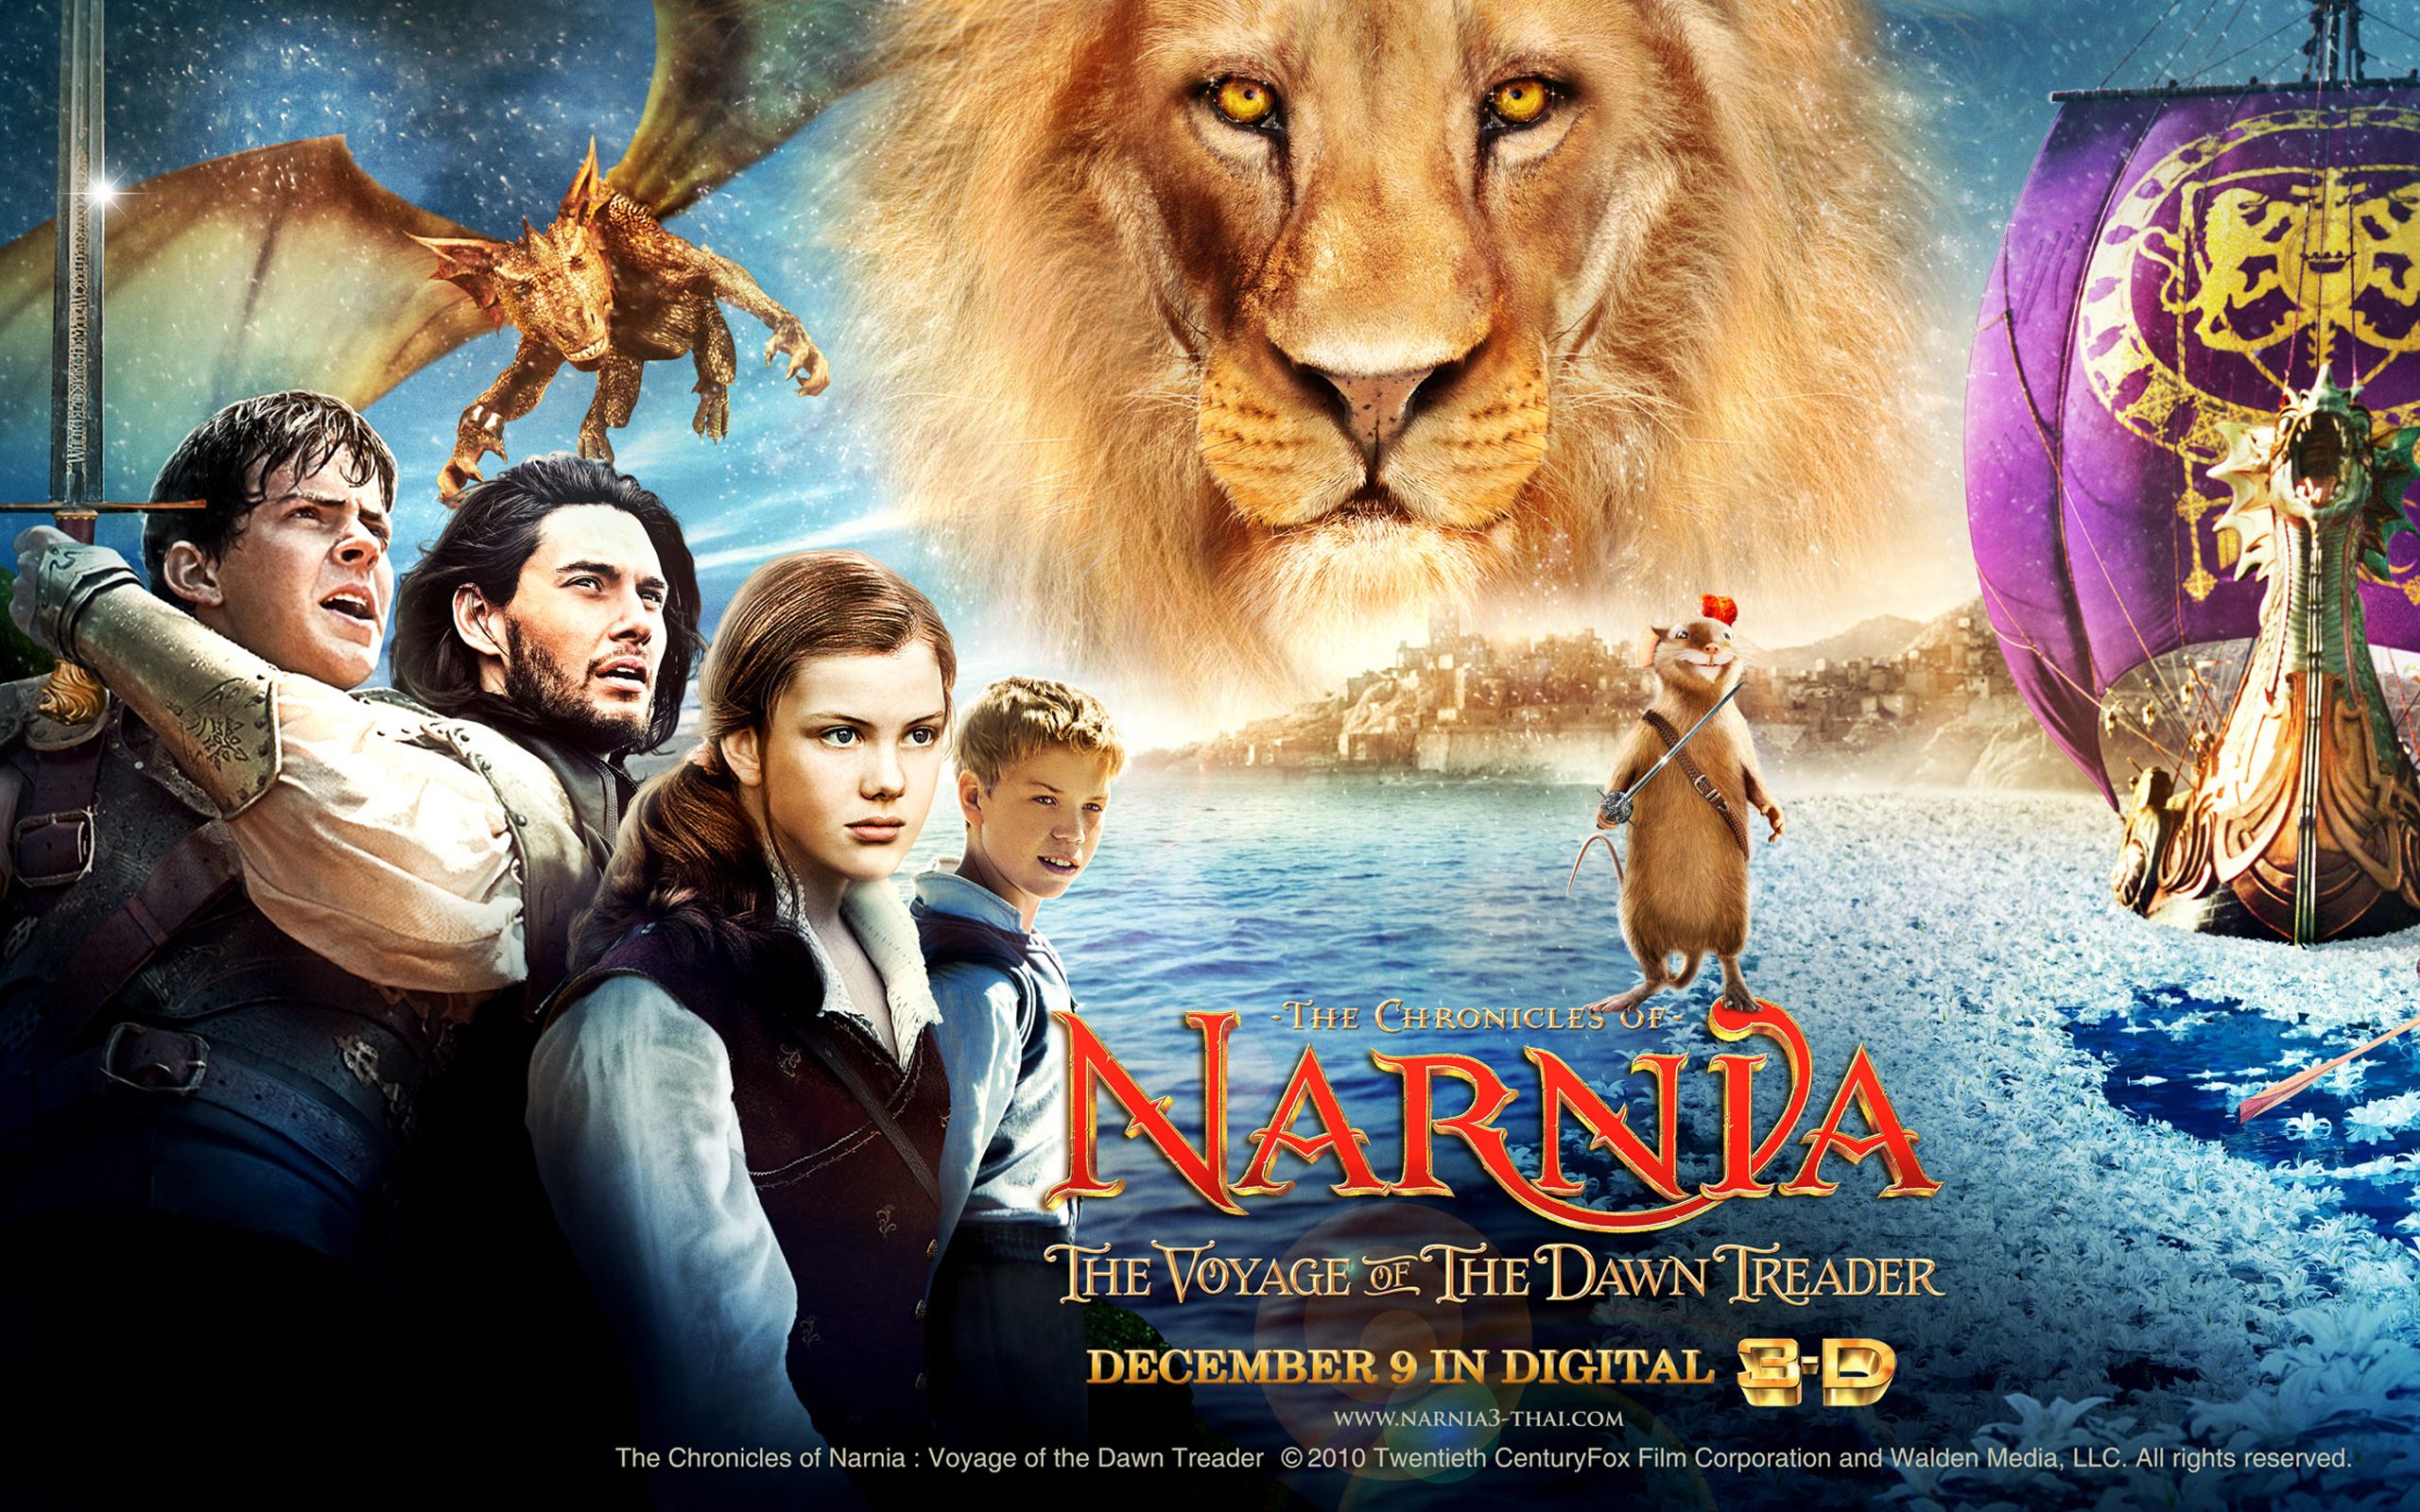 Narnia 4K wallpaper for your desktop or mobile screen free and easy to download